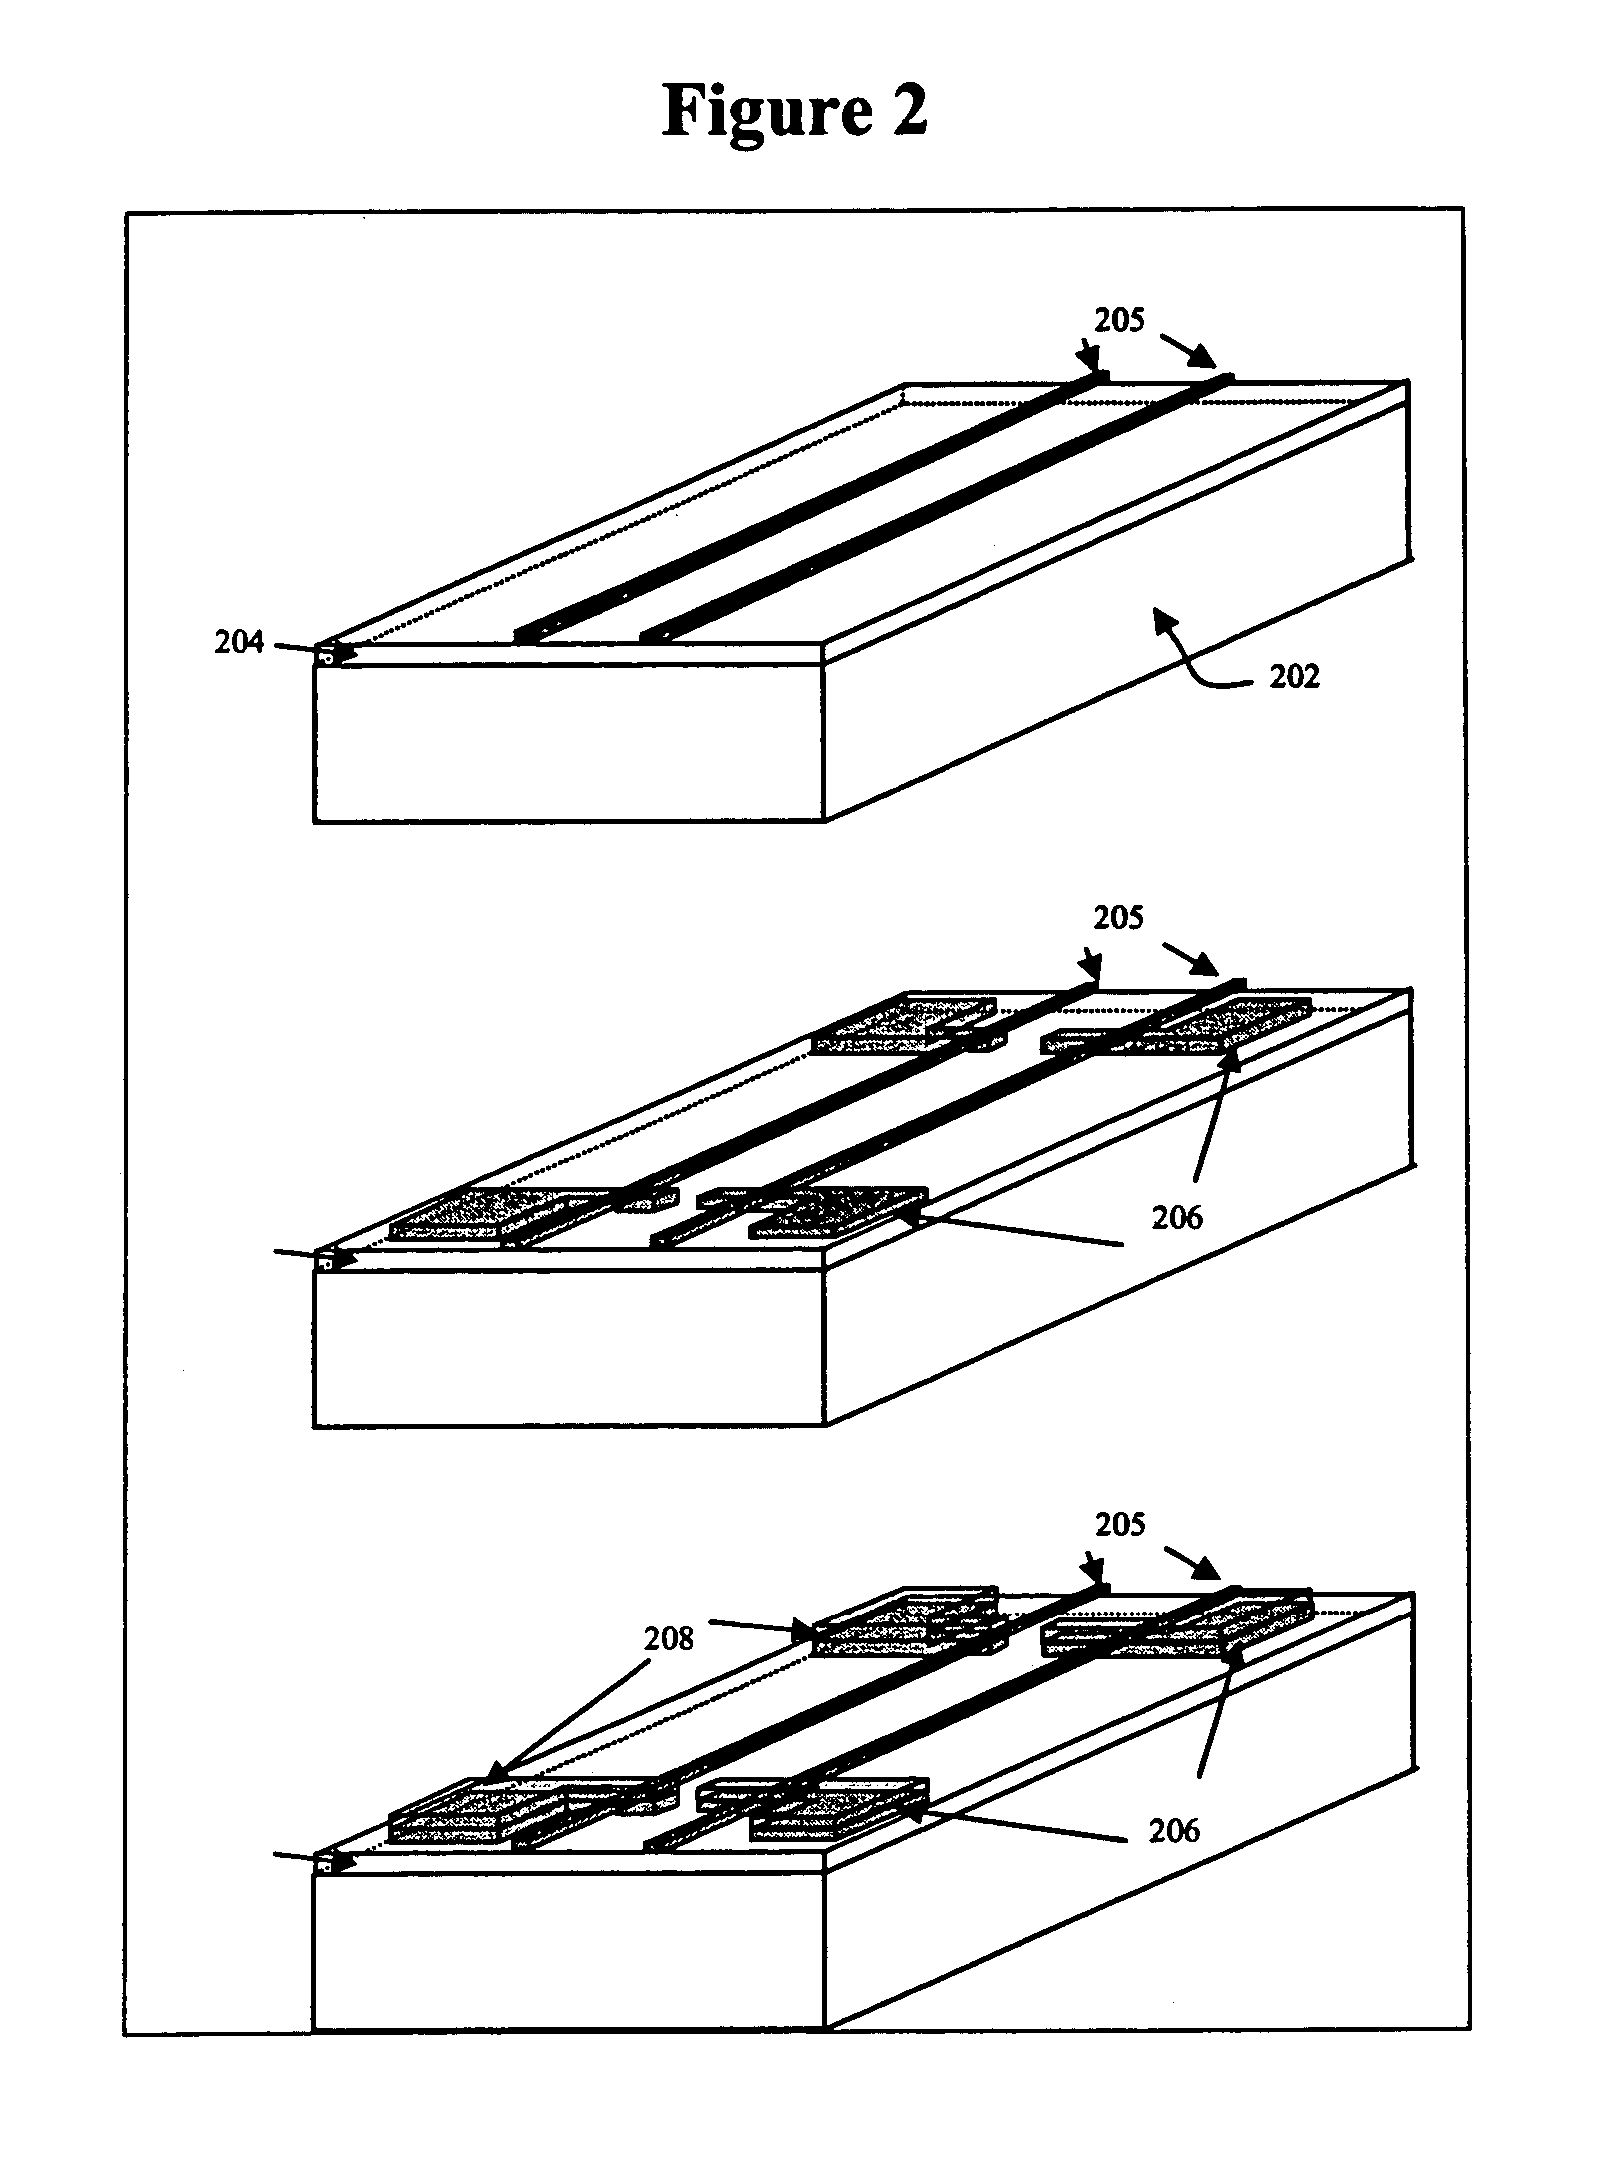 Controlled nanowire growth in permanent, integrated nano-templates and methods of fabricating sensor and transducer structures